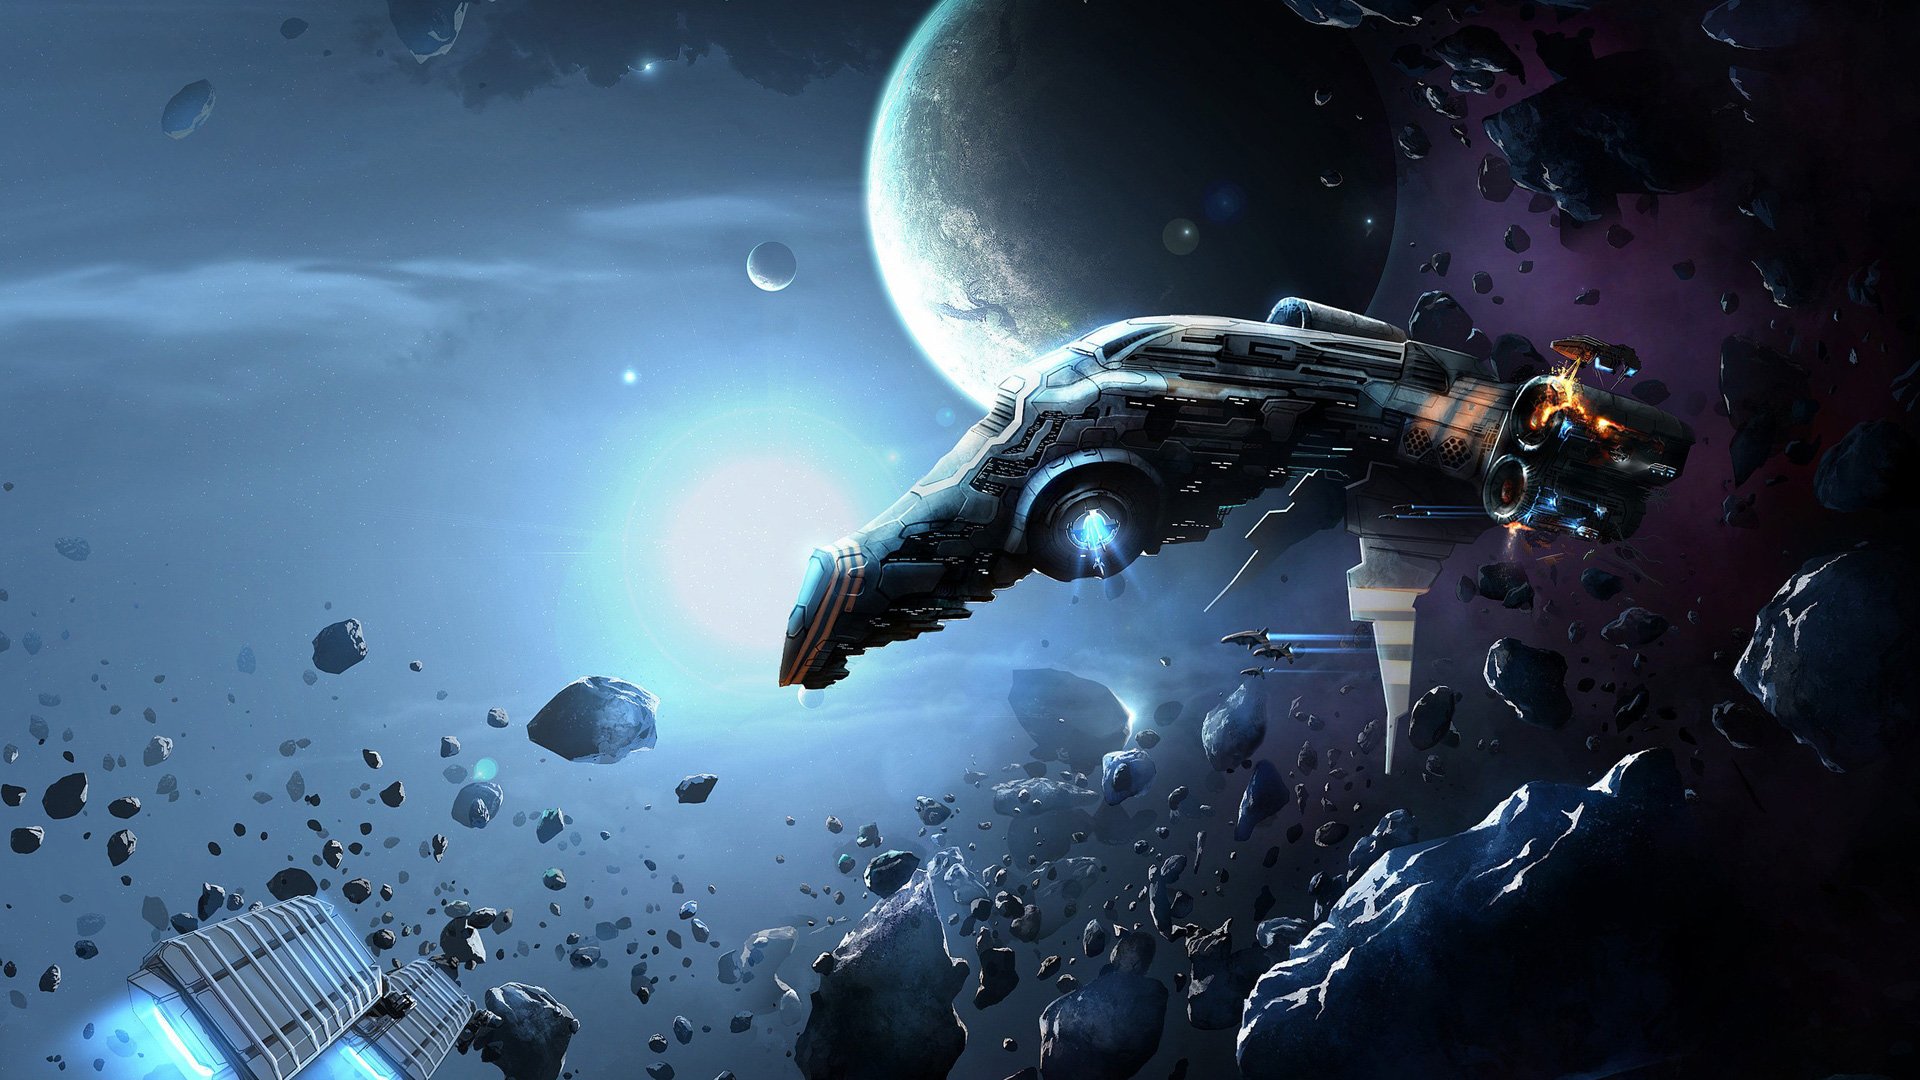 Eve Online Plaary Spacescape Wallpaper And Stock